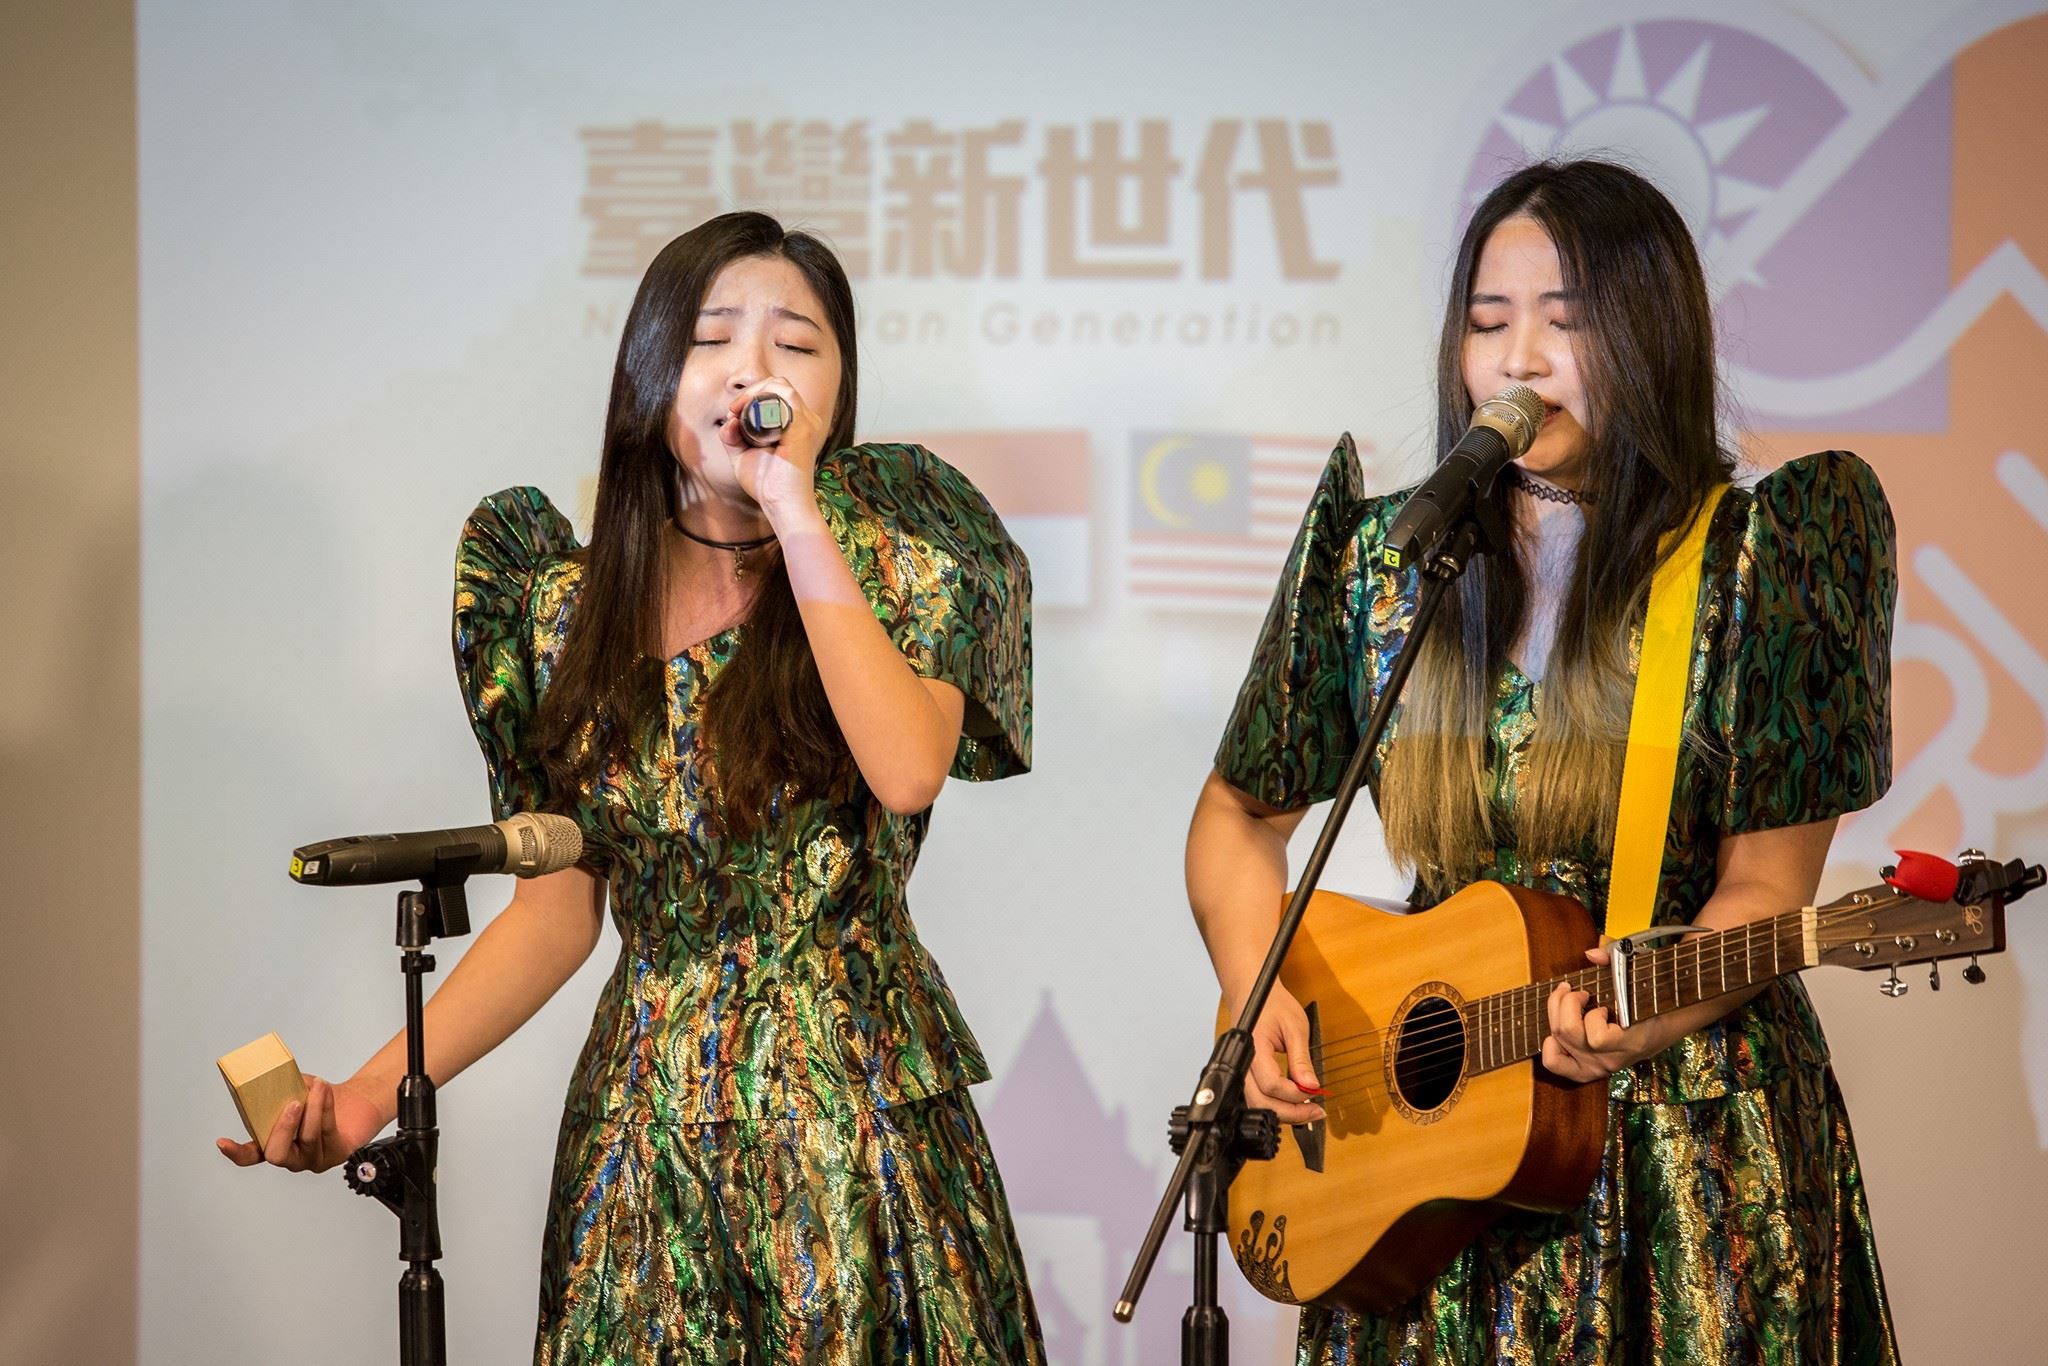 A band was set up by two second-generation immigrant sisters from the Philippines in order to express multiculturalism through music.  Photo reproduced from 呂曉曉-Patricia曉清＆Abby曉倩 Facebook